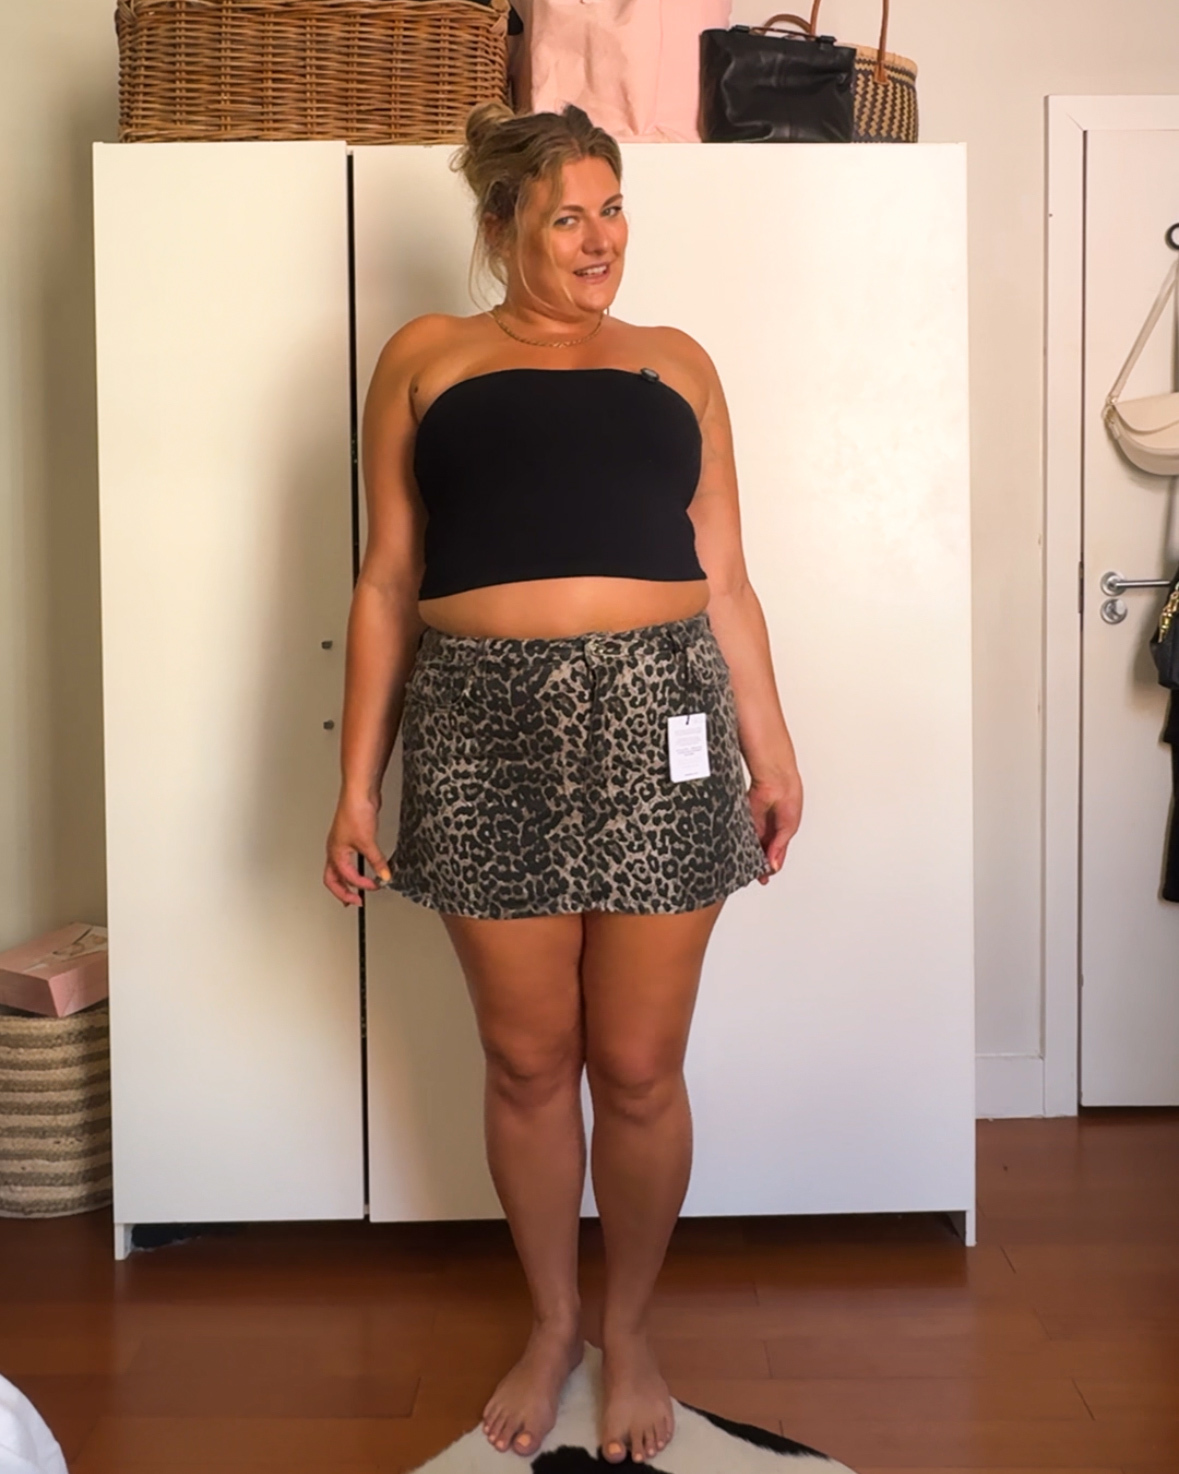 She claimed that this mini skirt was not only too "tight" but much too "short" too